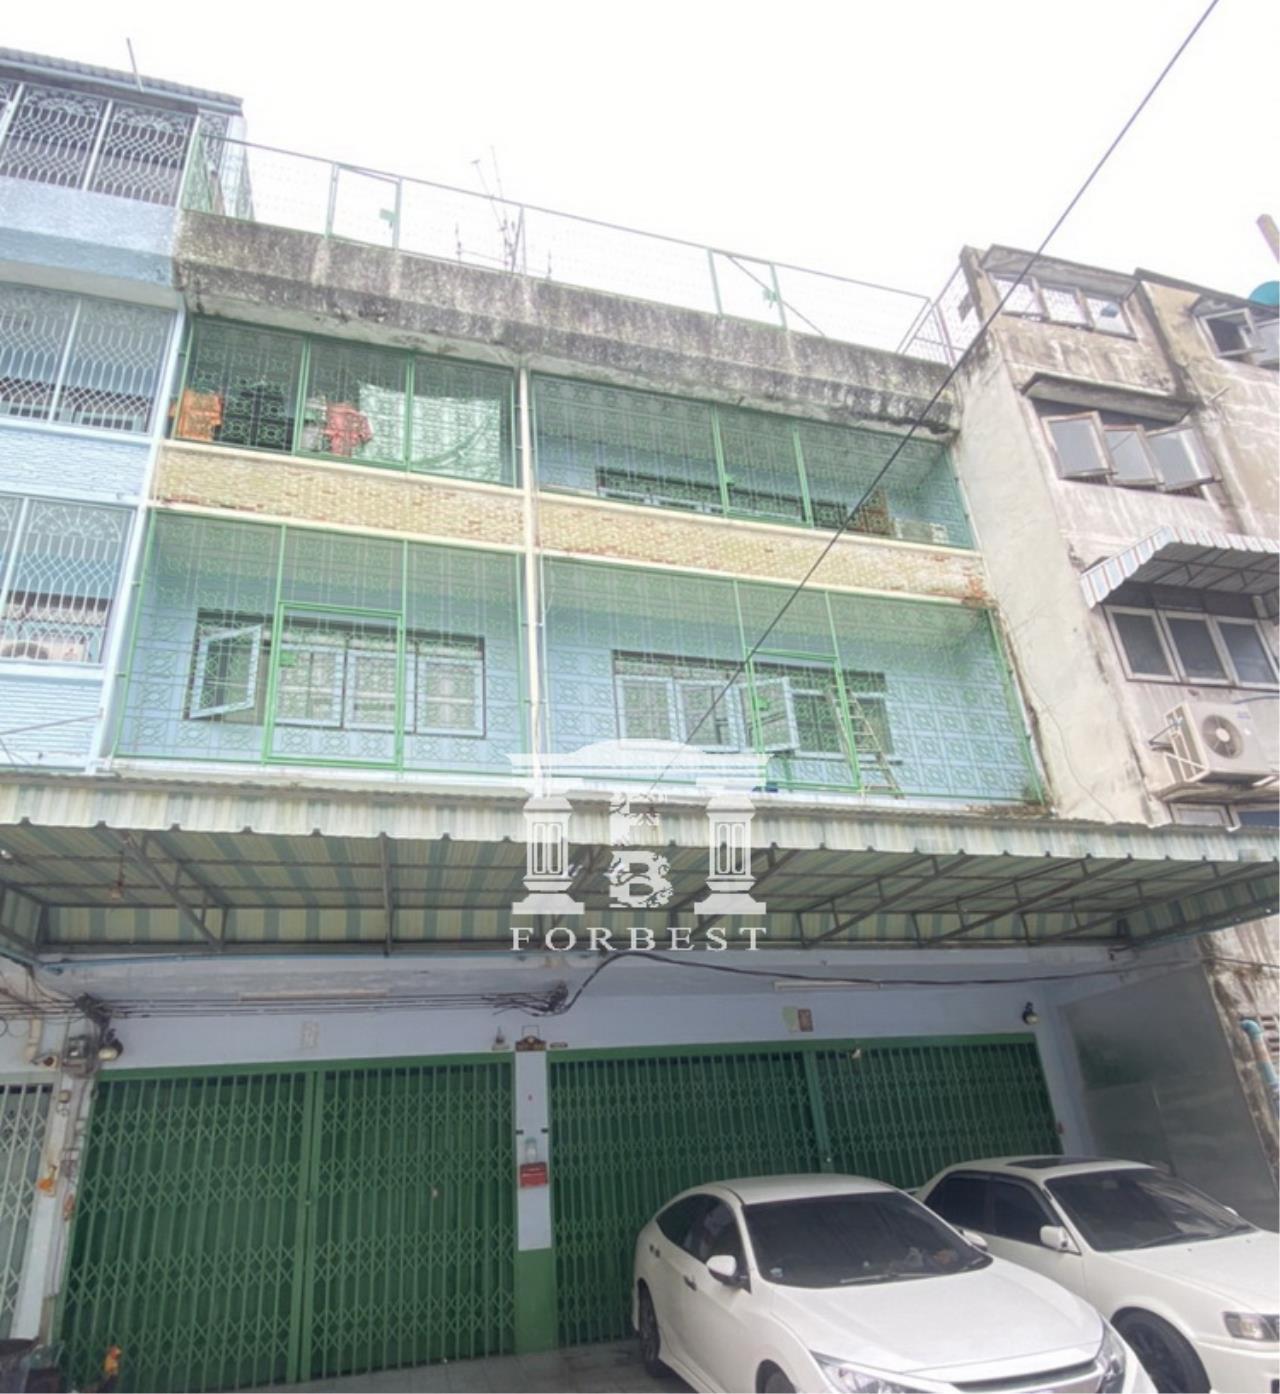 Forbest Properties Agency's 90487 - Taksin, Shophouse for sale, 3 floors, 2 booths, area 184 Sq.m. 1